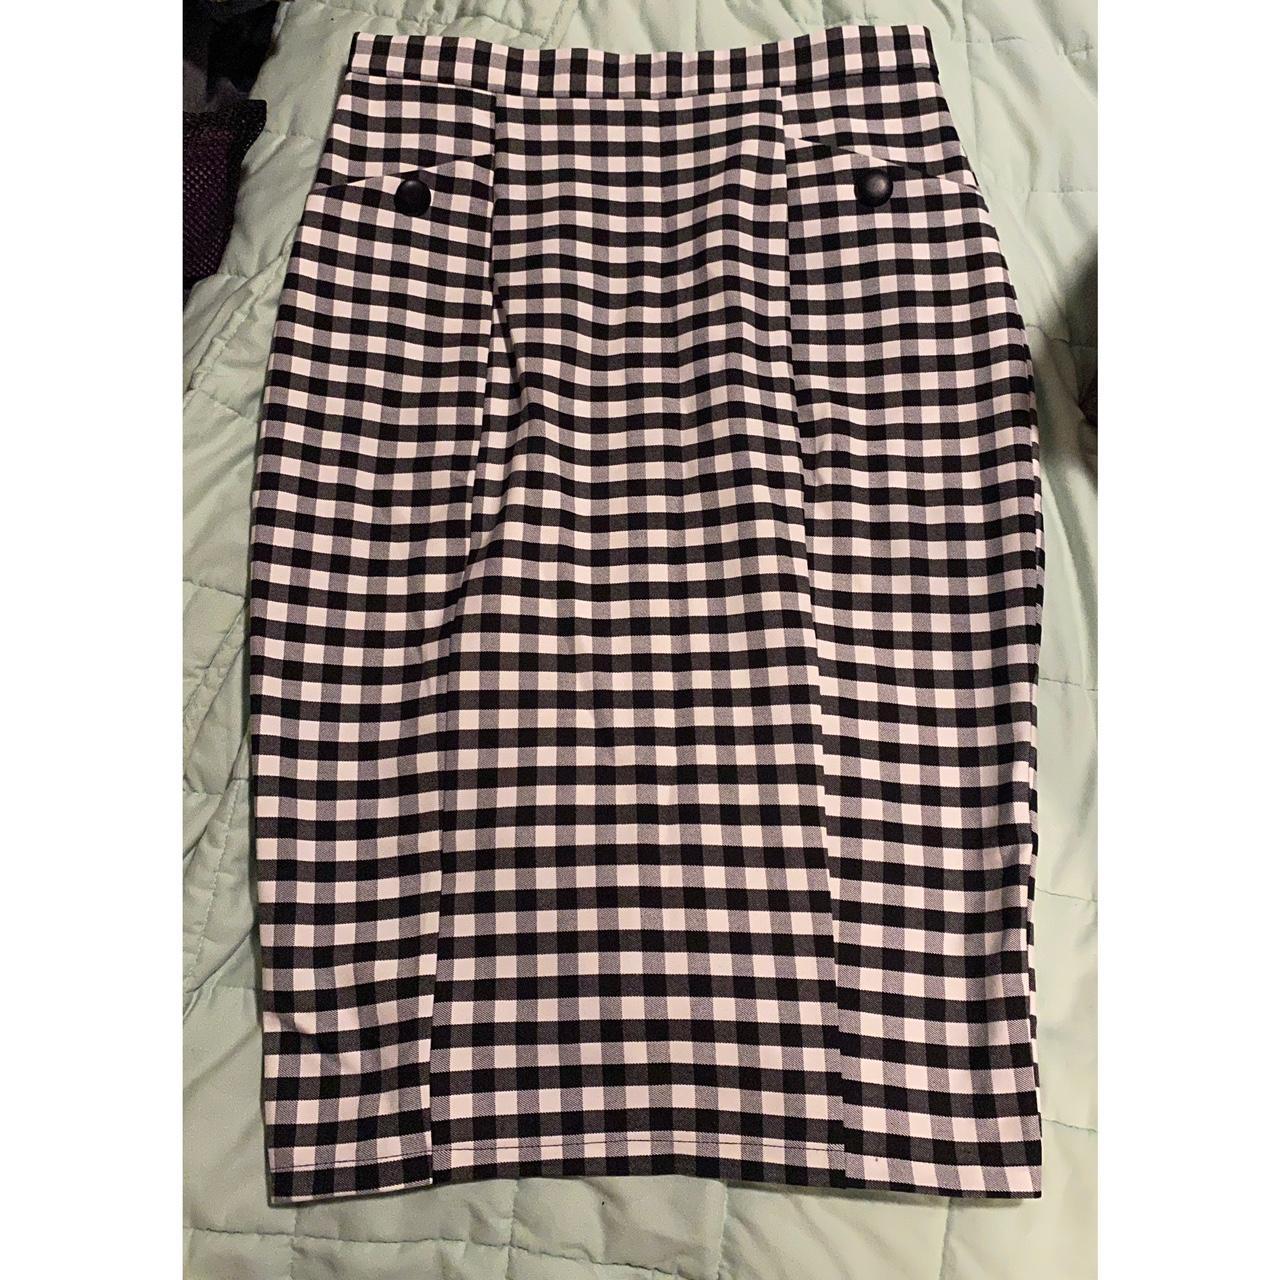 Collectif Women's White and Black Skirt